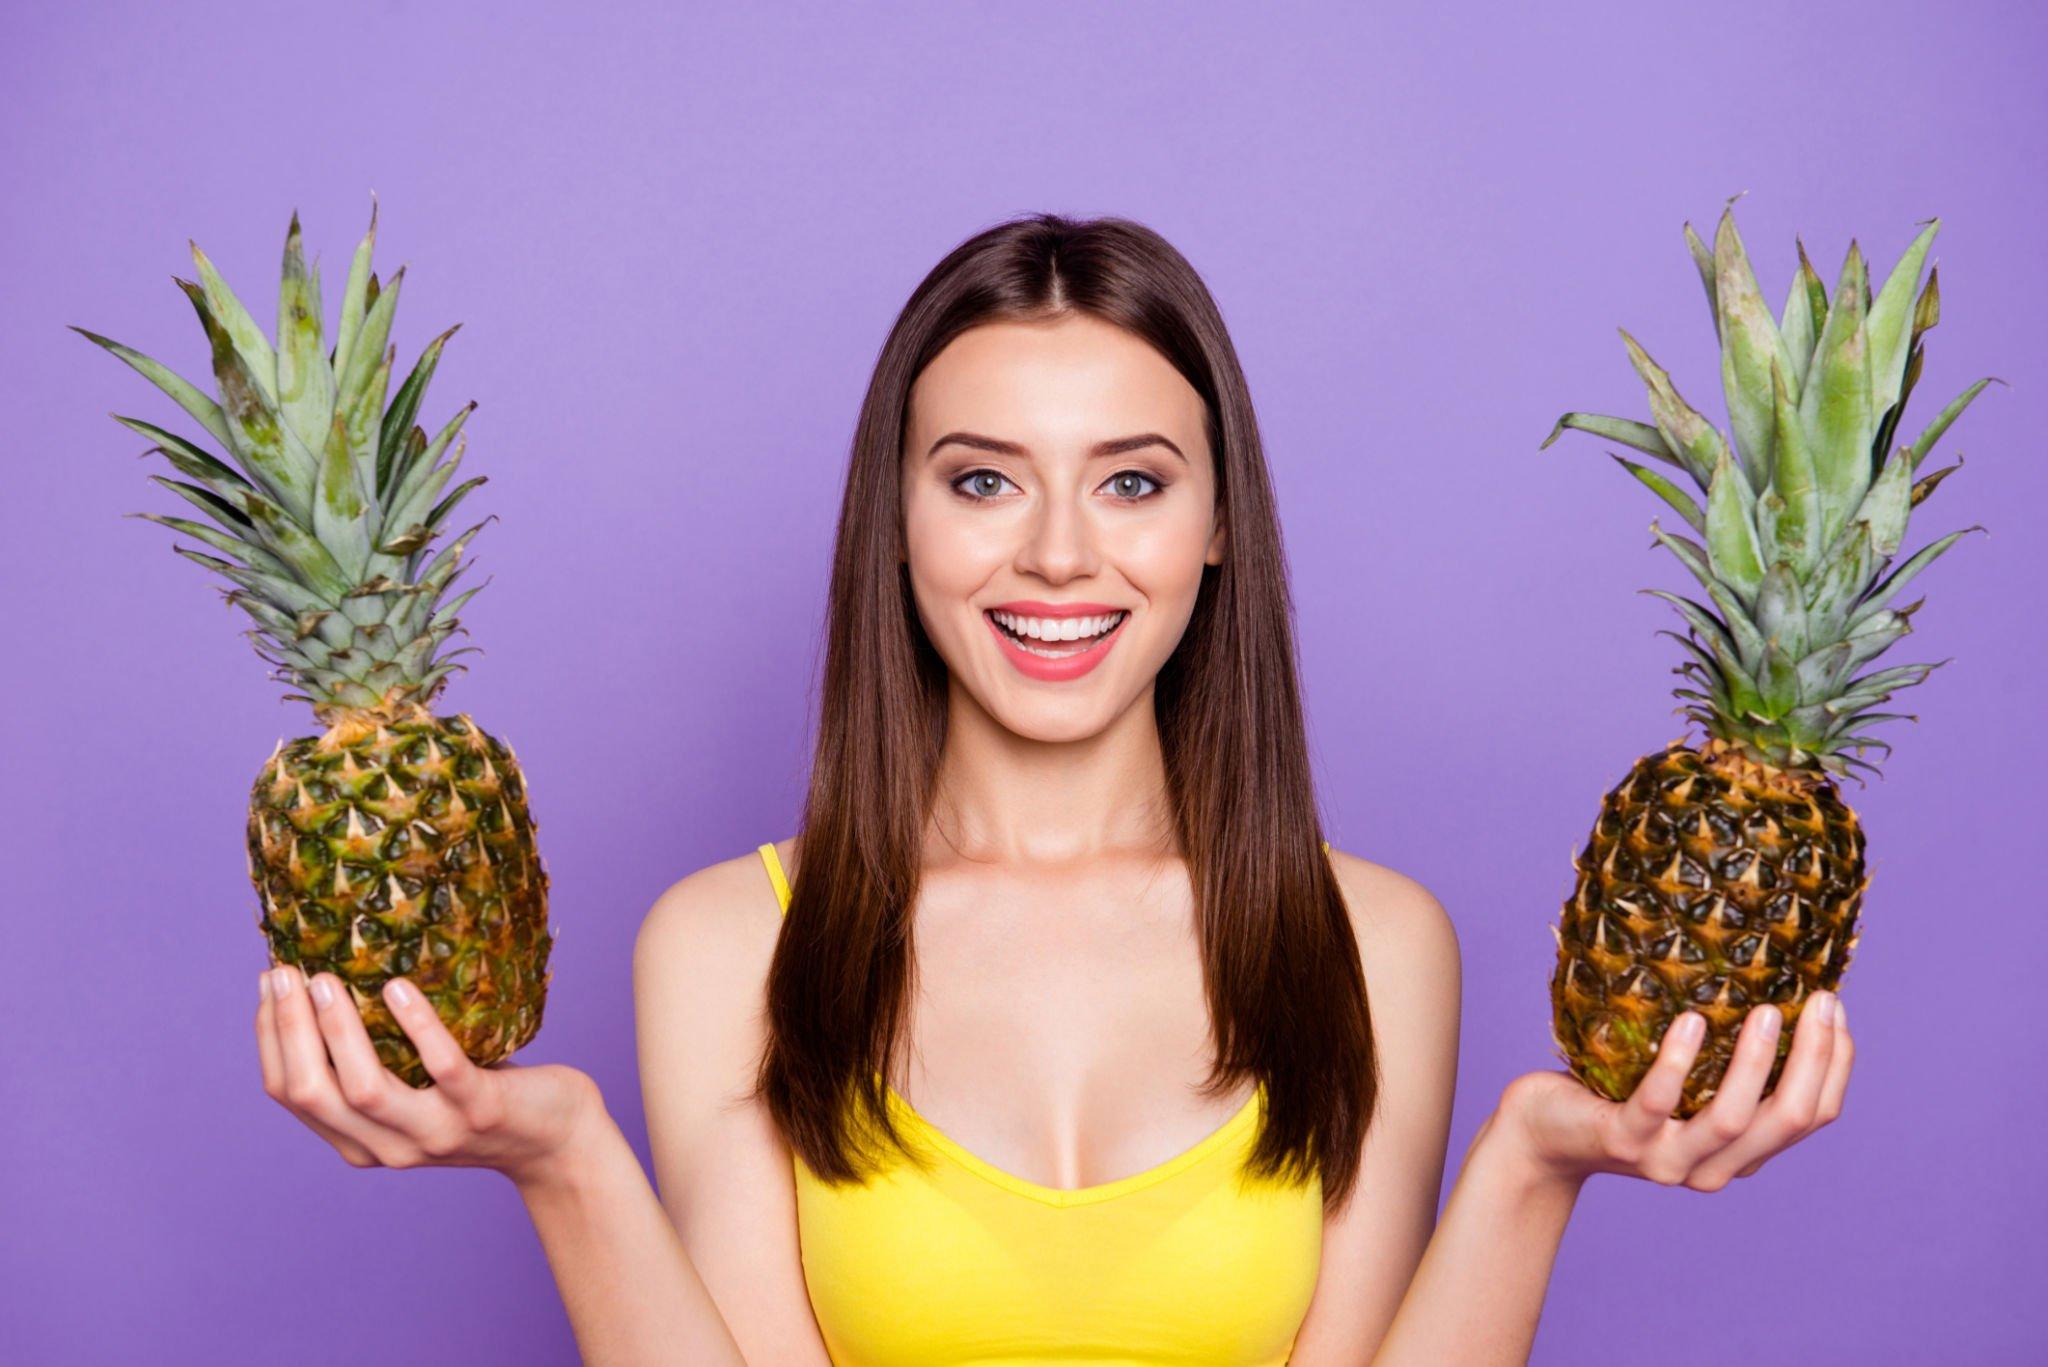 Pineapple - wellhealthorganic.com:weight-loss-in-monsoon-these-5-monsoon-fruits-can-help-you-lose-weight